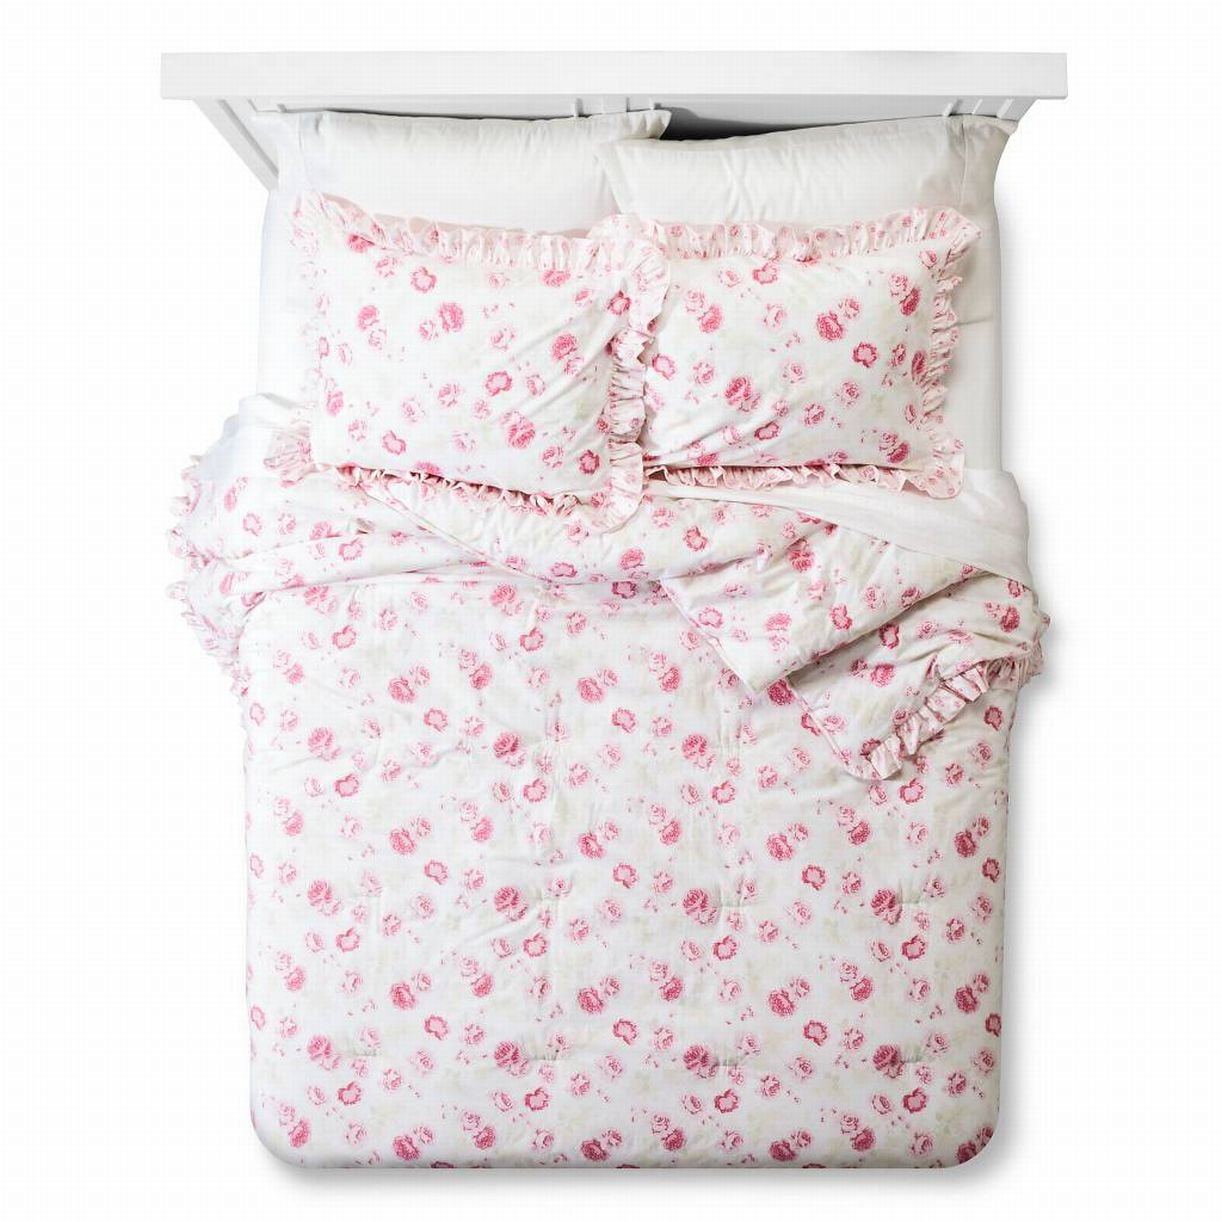 Simply Shabby Chic Floral Twin Duvet Cover pink **DUVET ONLY**  #0384